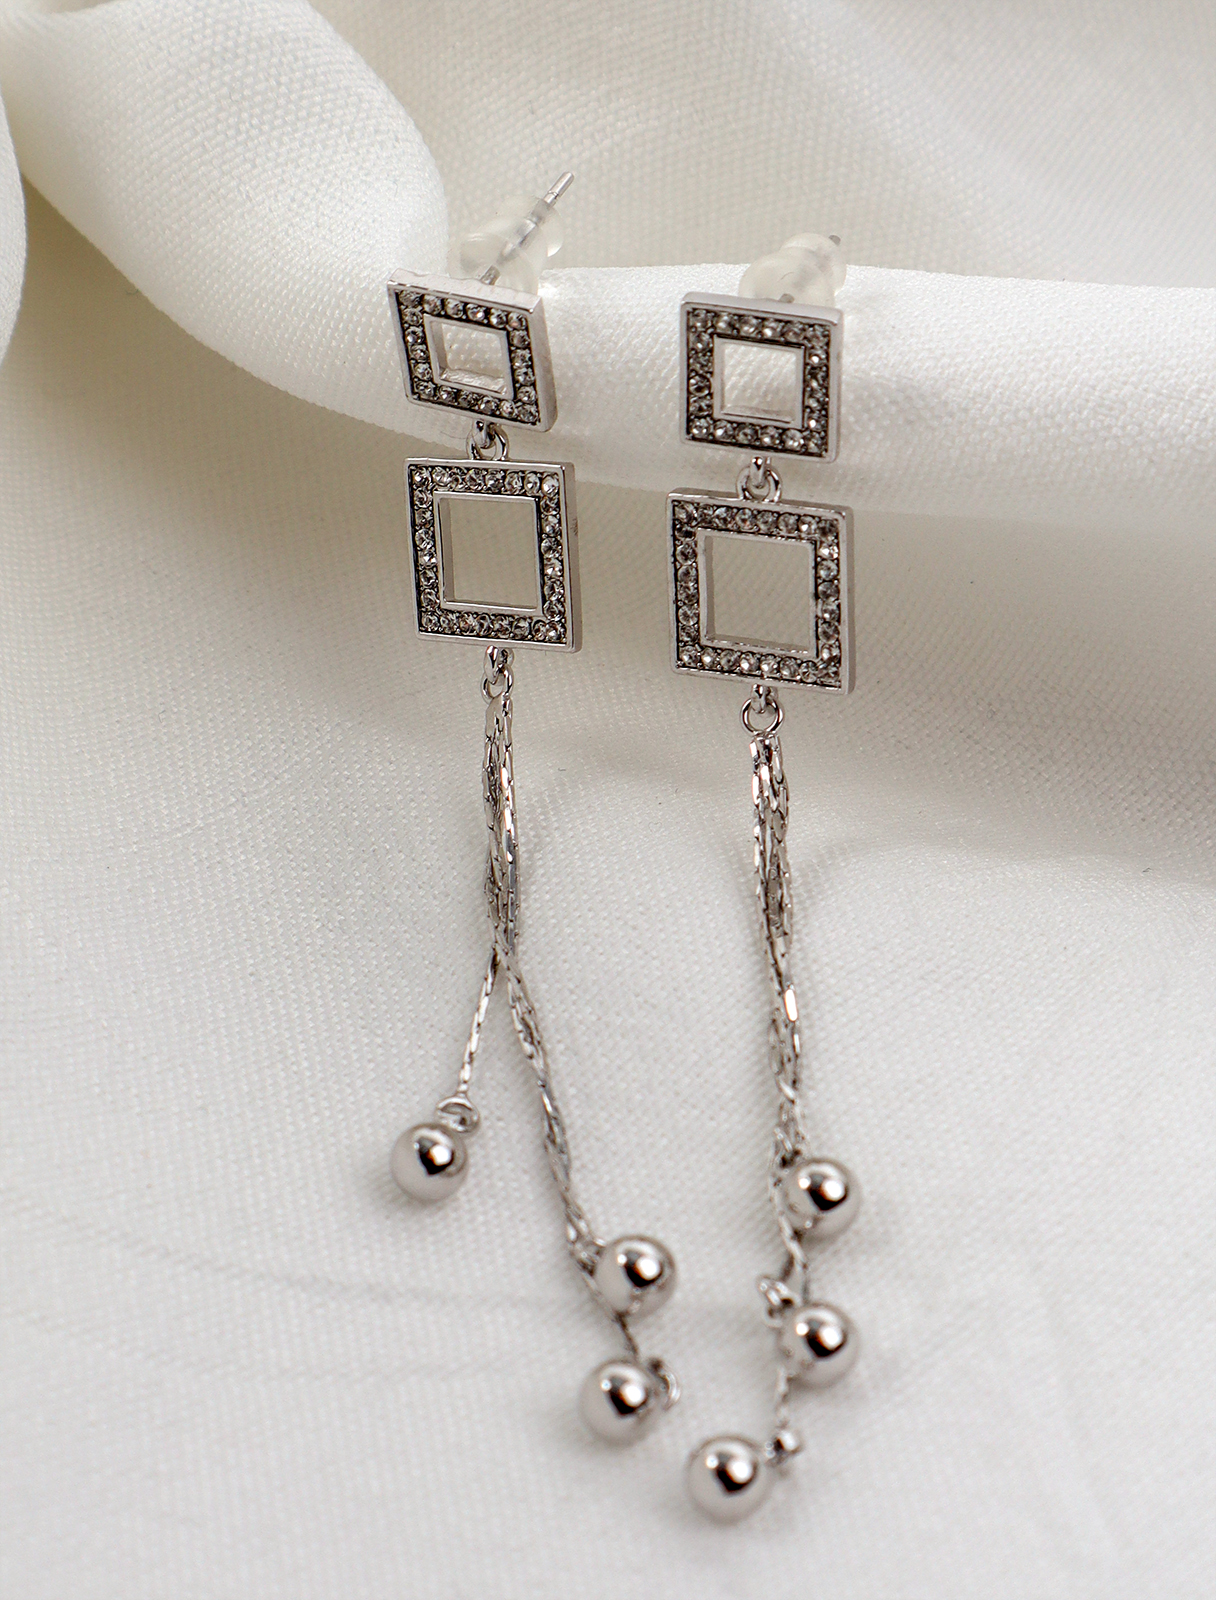 Drop earrings with a crystal square design with ball pendants